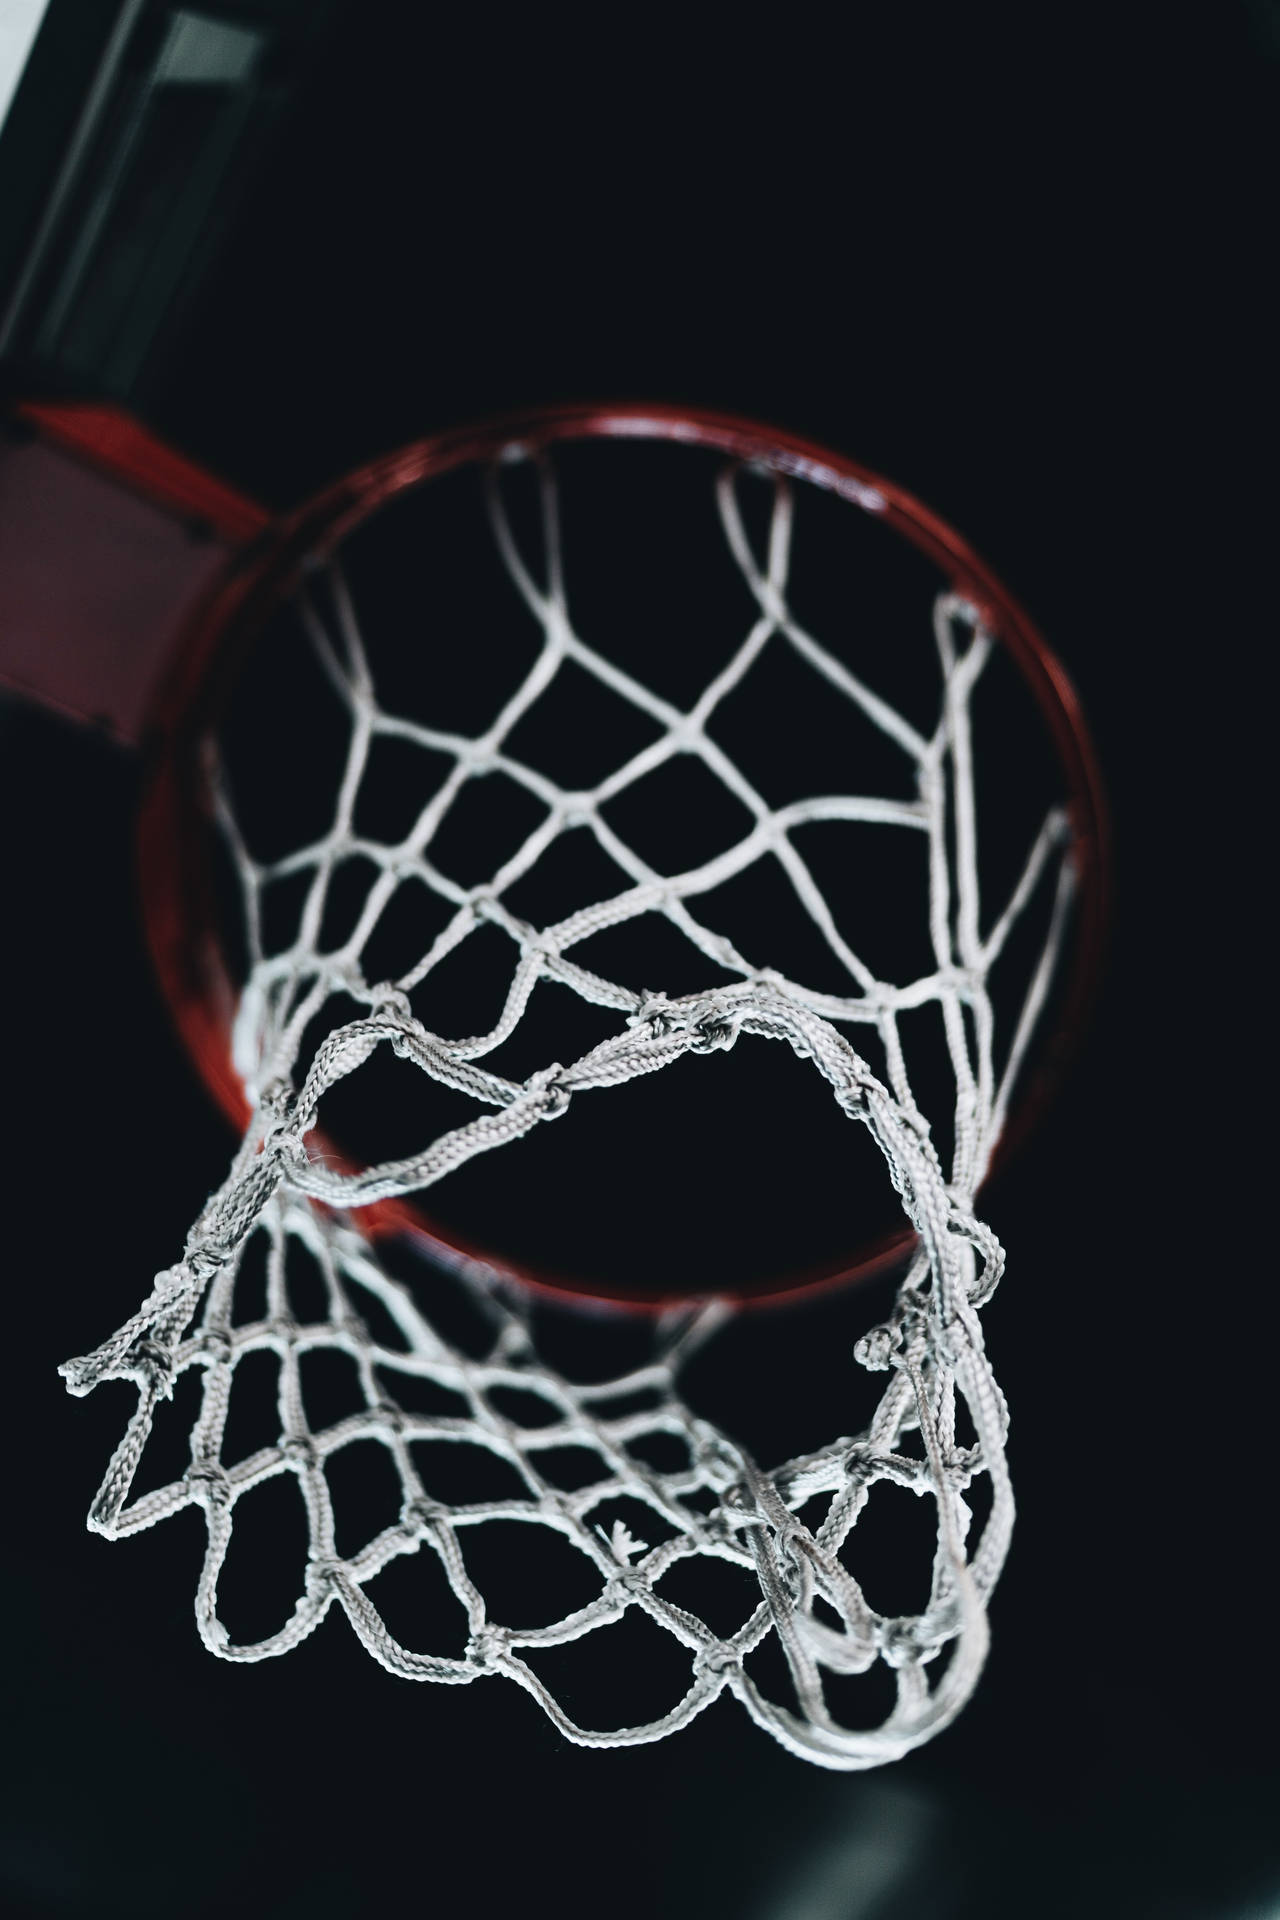 Aim high in the game of basketball Wallpaper